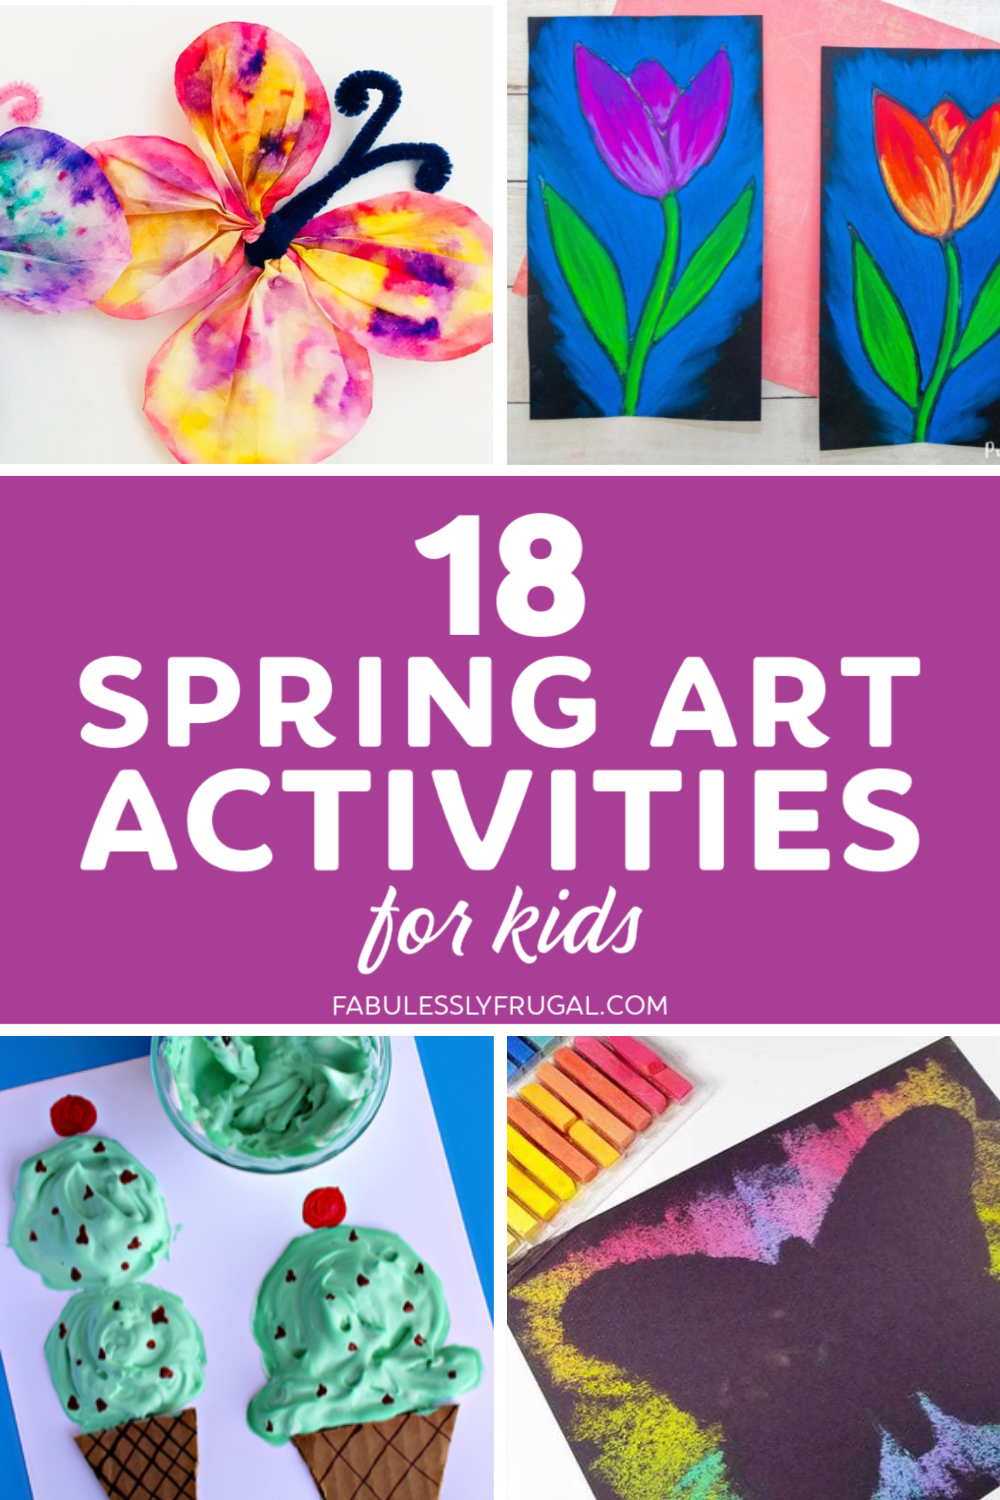 Spring art projects for kids